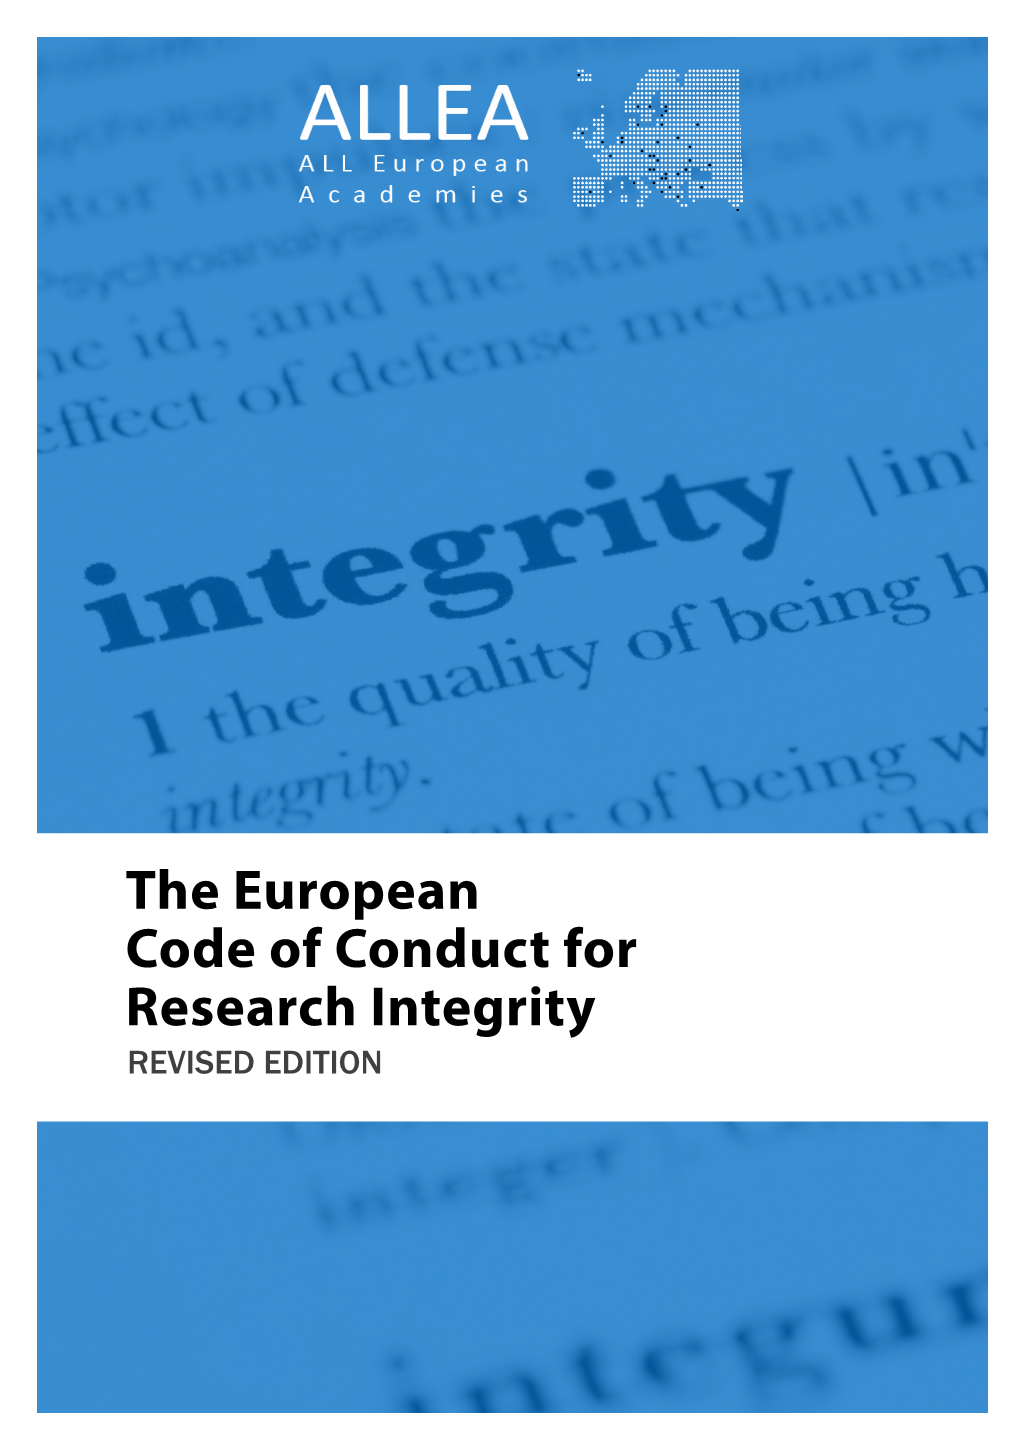 The European Code of Conduct for Research Integrity REVISED EDITION Table of Contents